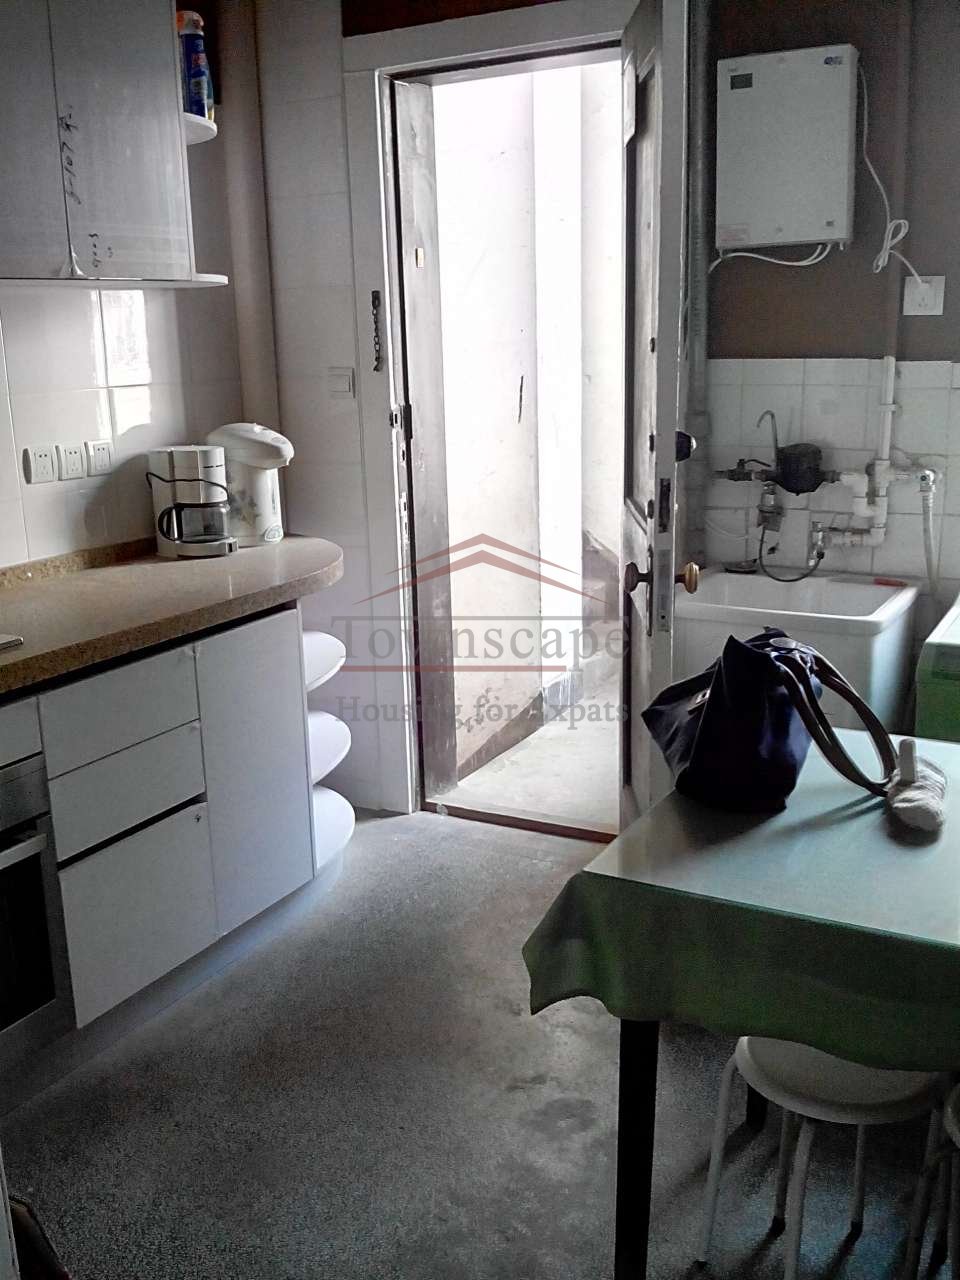 Shanghai apartment for rent Perfect 2 Bedroom Lane House in Central Shanghai South Shanxi rd L1&10